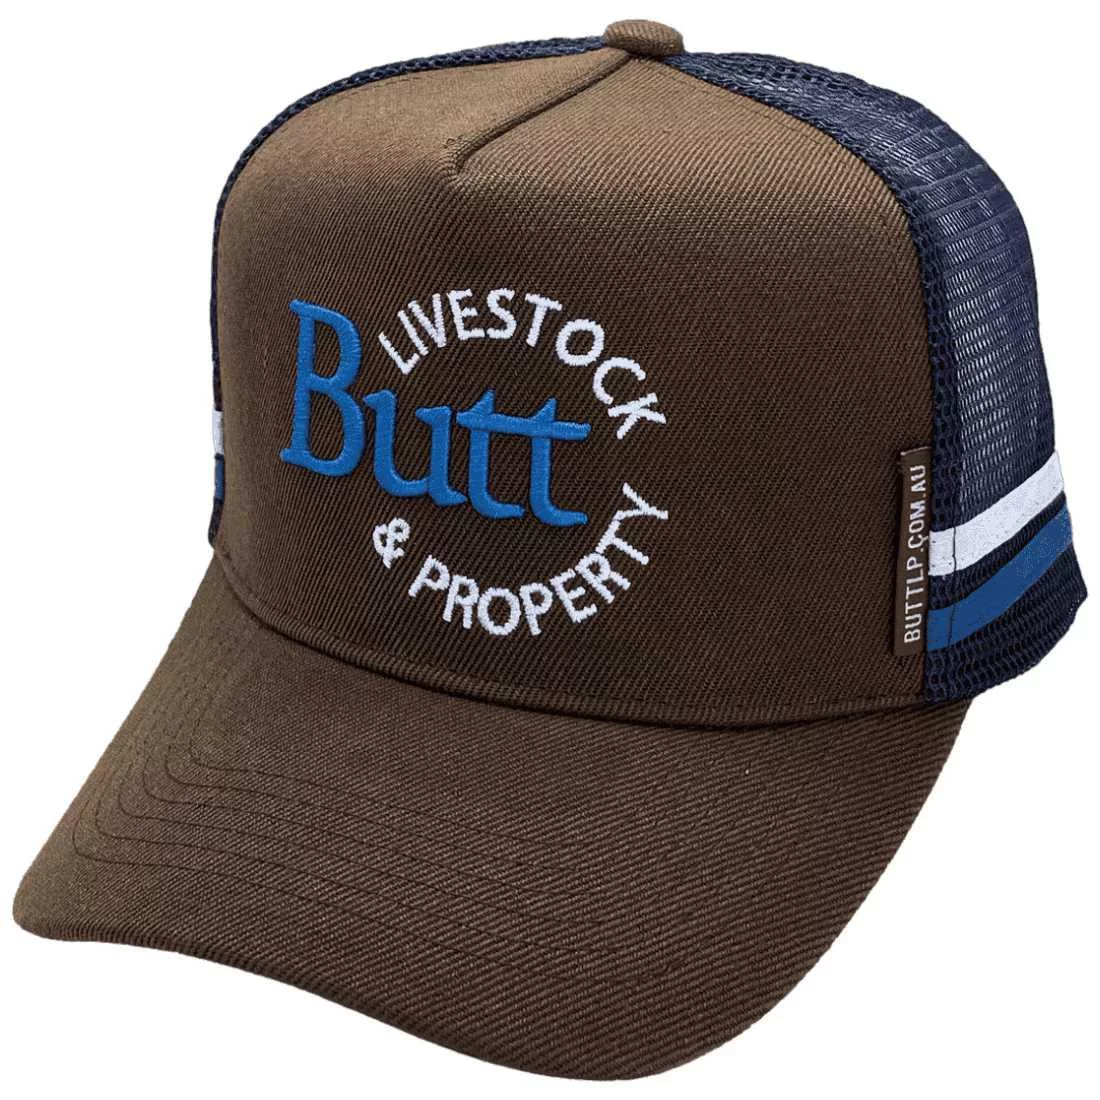 Butt Livestock & Property Yass NSW HP Original Midrange Aussie Trucker Hat with Double Side Bands Acrylic Chocolate Navy White